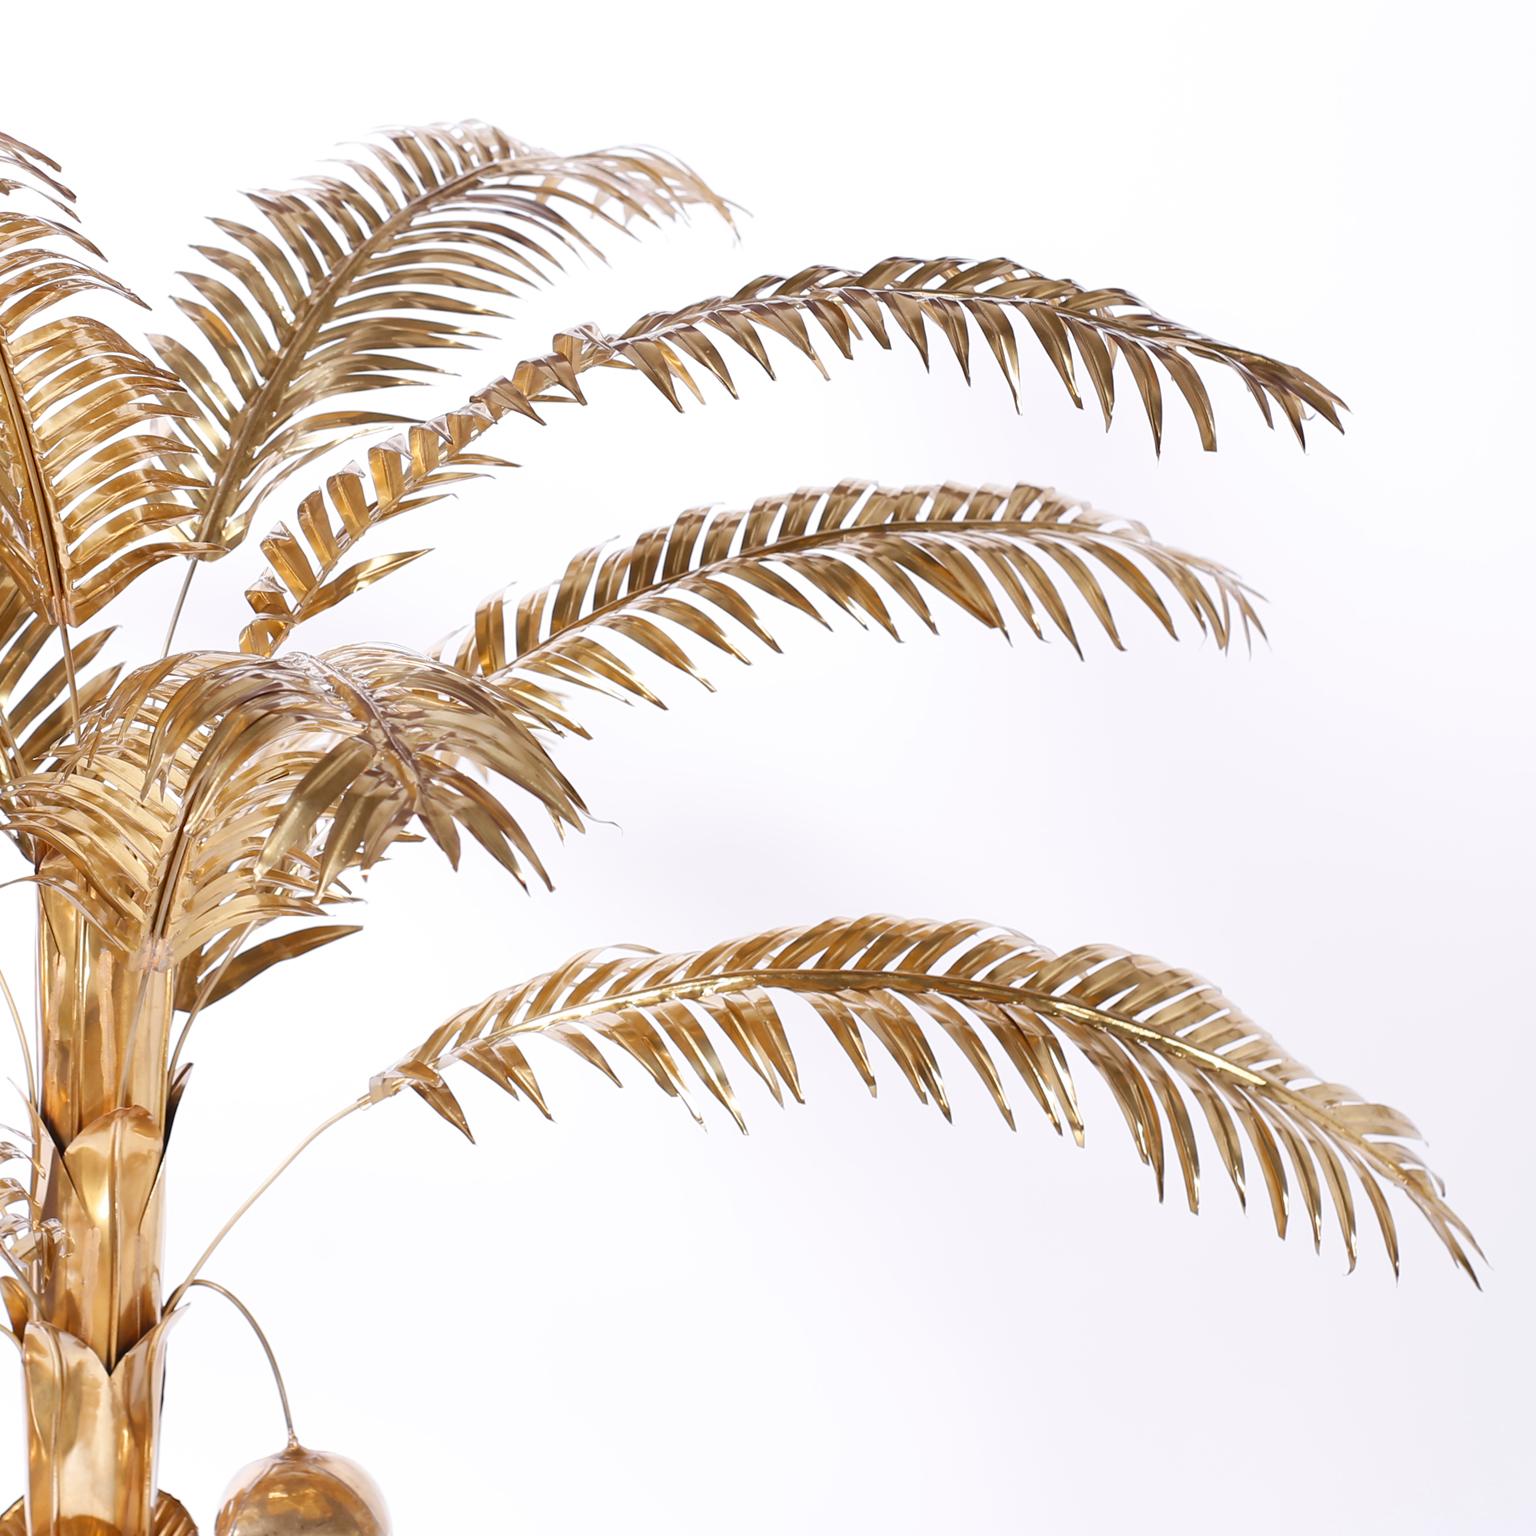 Chic midcentury stylized palm tree with removable fronds, coconuts, reticulated trunk and a round weighted base. Hand polished and lacquered for easy care.